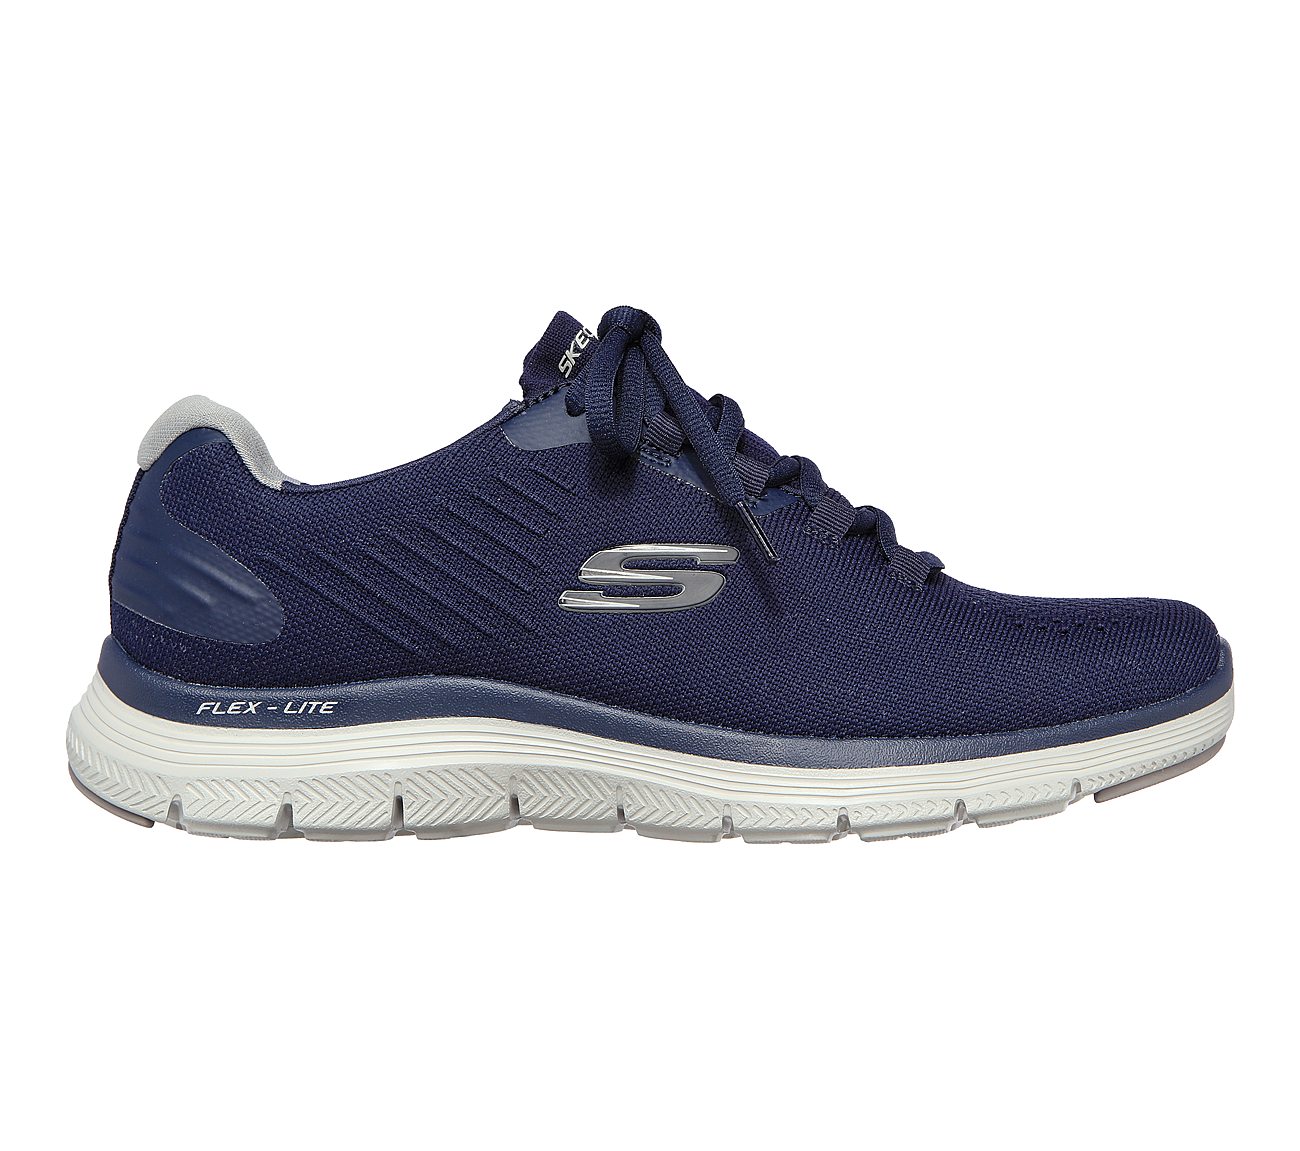 FLEX ADVANTAGE 4.0 - OVERTAKE, NAVY/CHARCOAL Footwear Right View